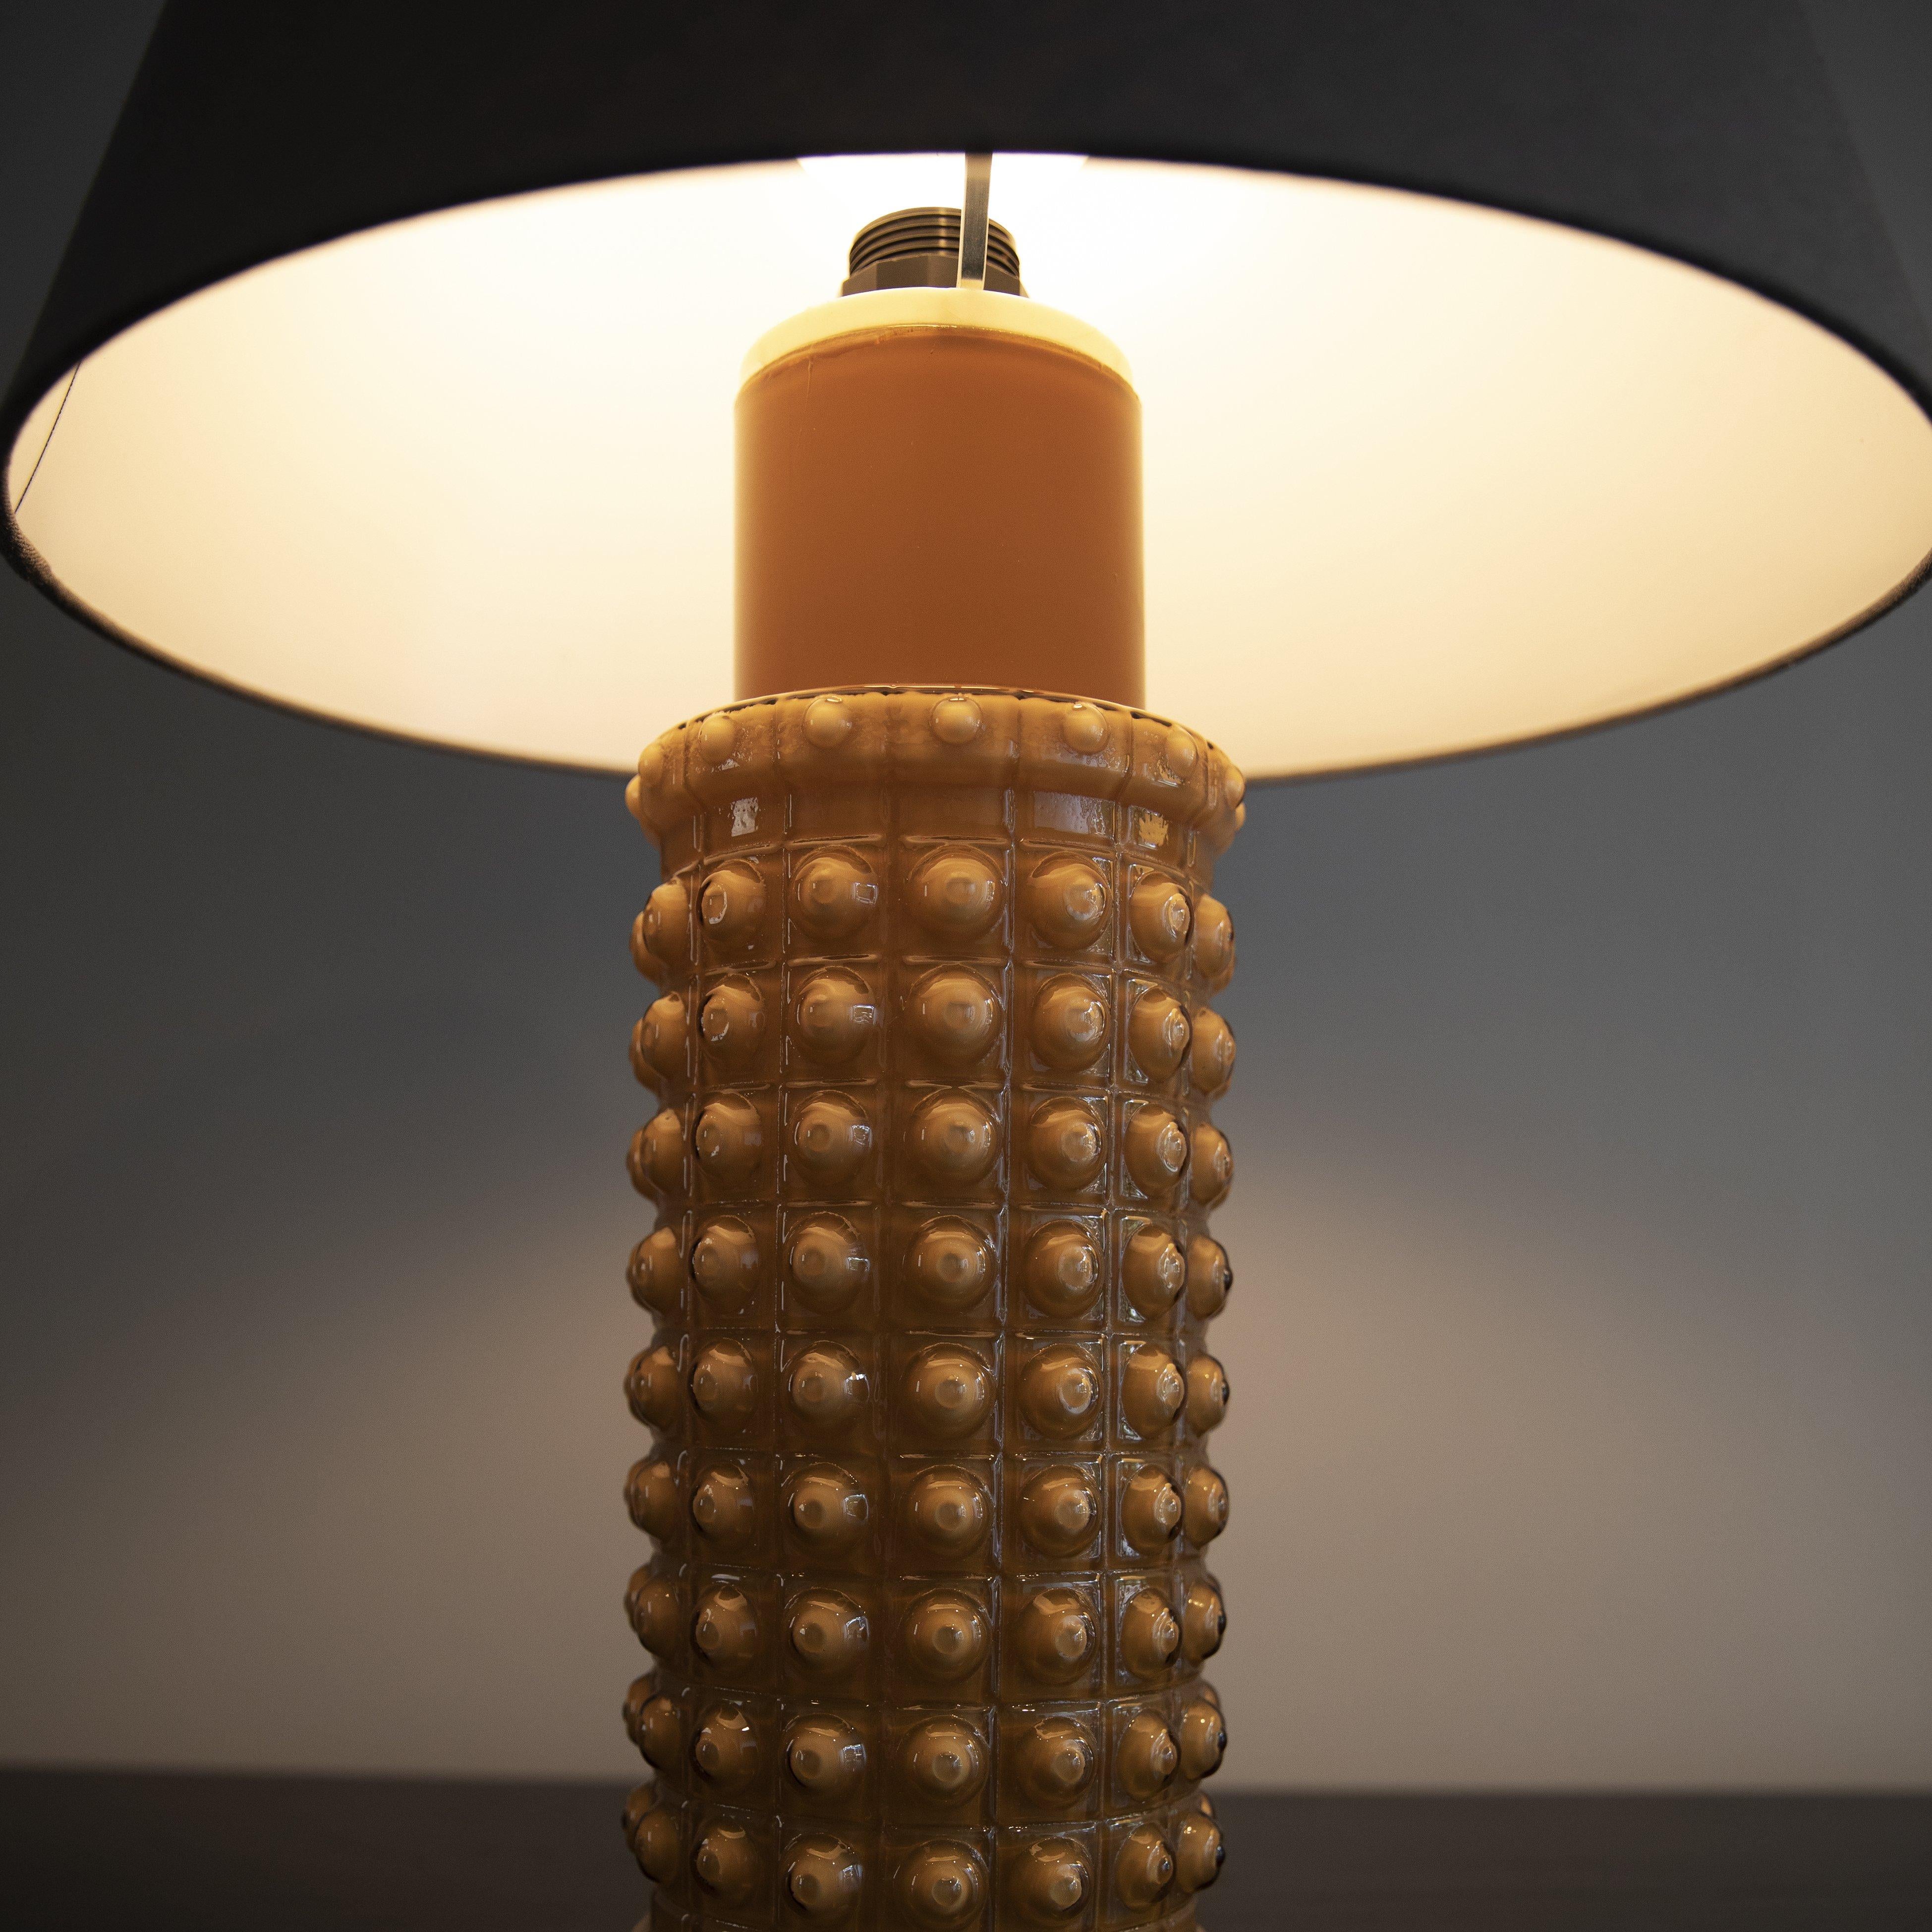 Blown Glass Helena Tynell Mould-blown Textured Glass Lamp, Sweden, 1968